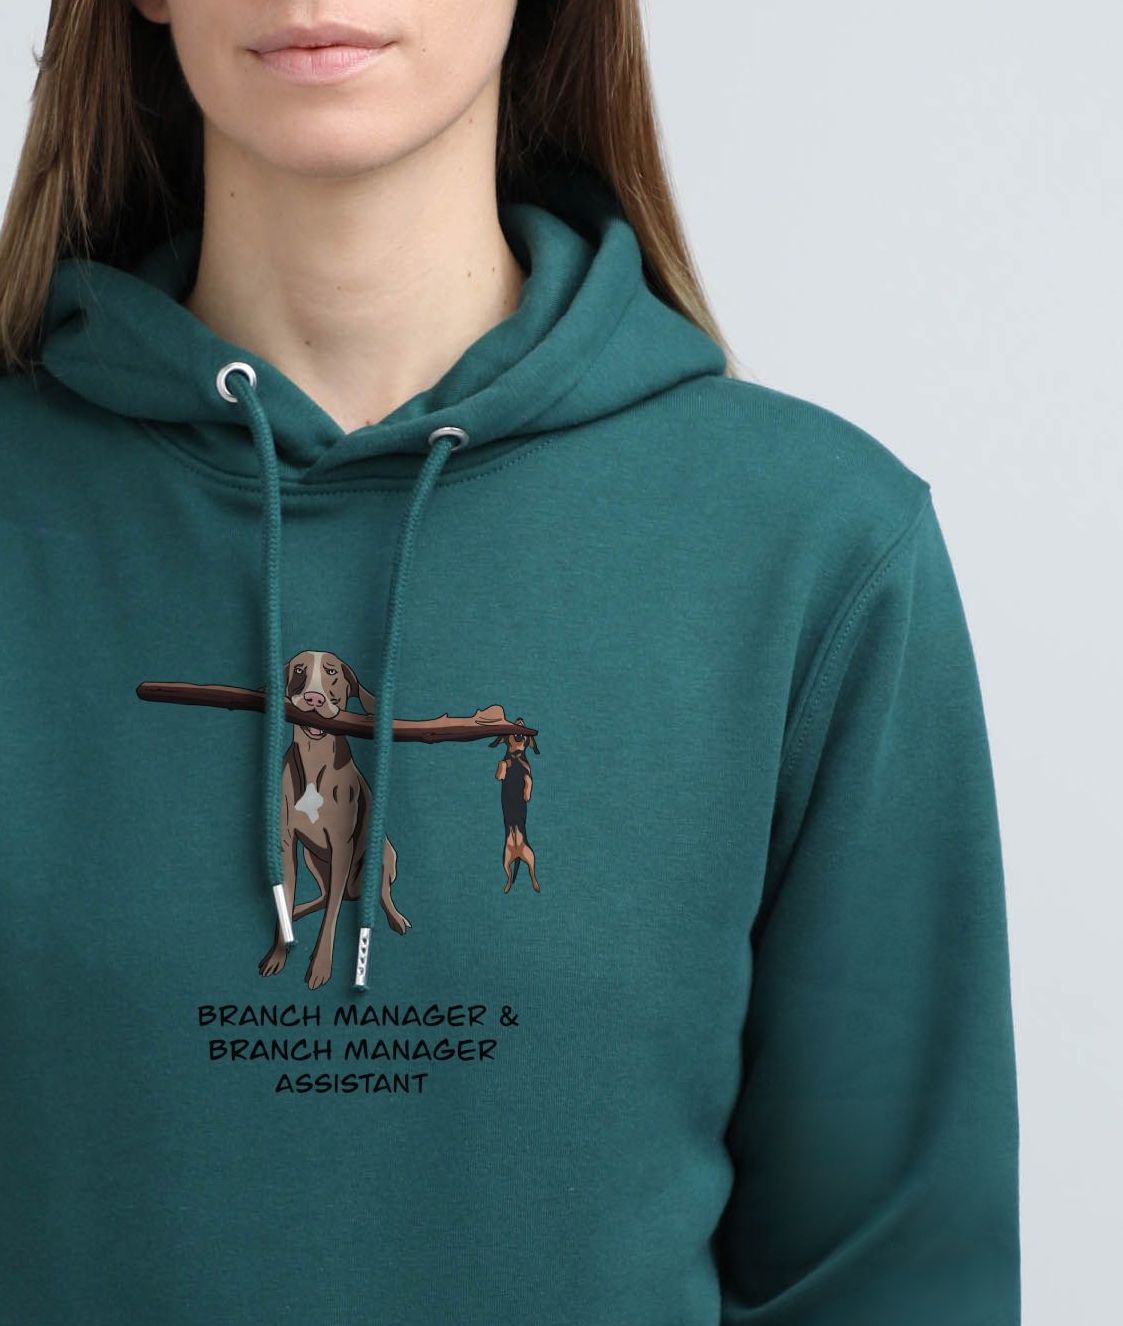 Manager dog | Hoodie with dog. Regular fit | Unisex - premium dog goods handmade in Europe by My Wild Other